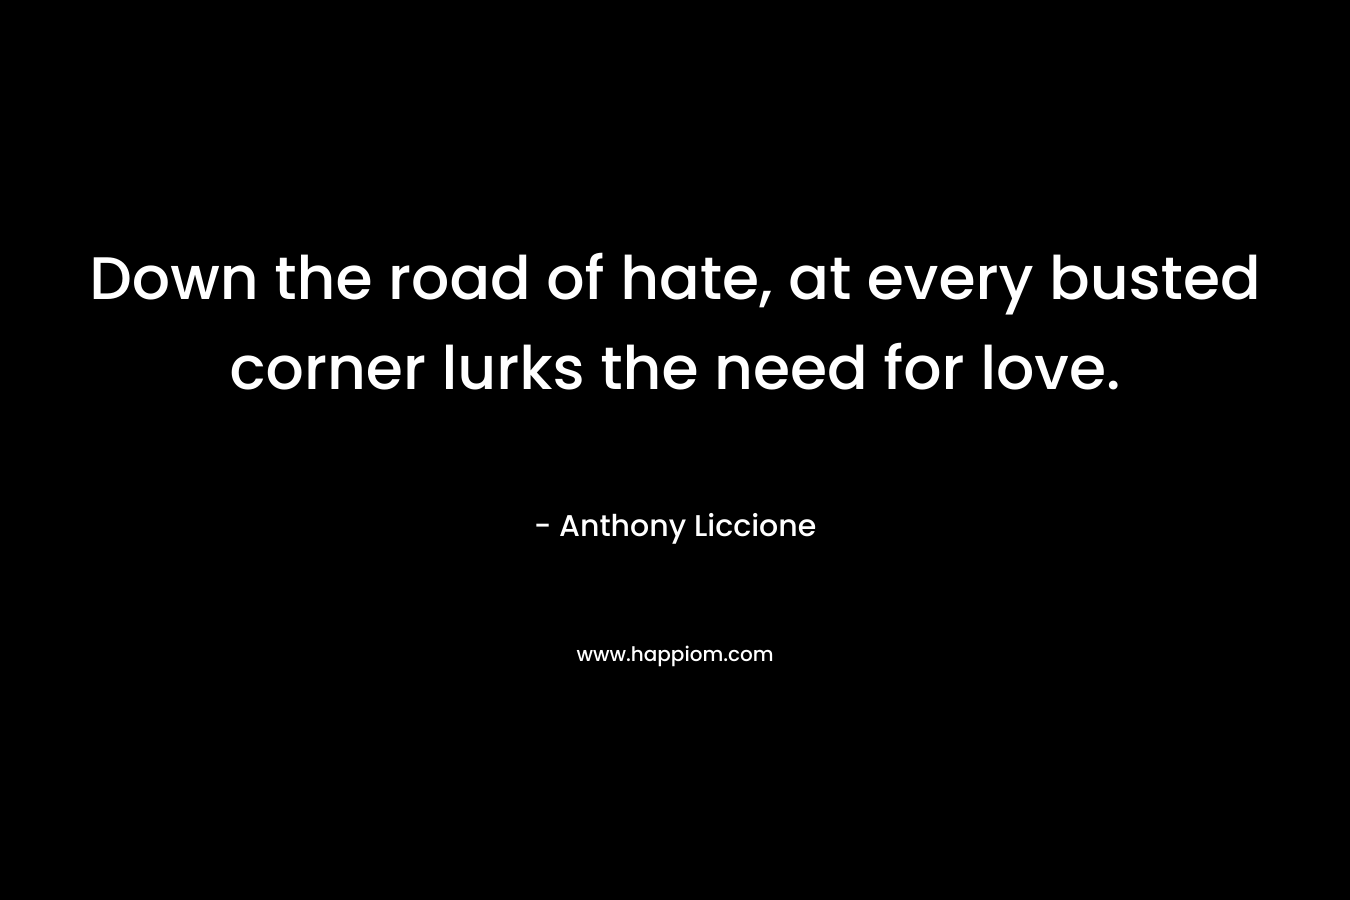 Down the road of hate, at every busted corner lurks the need for love.